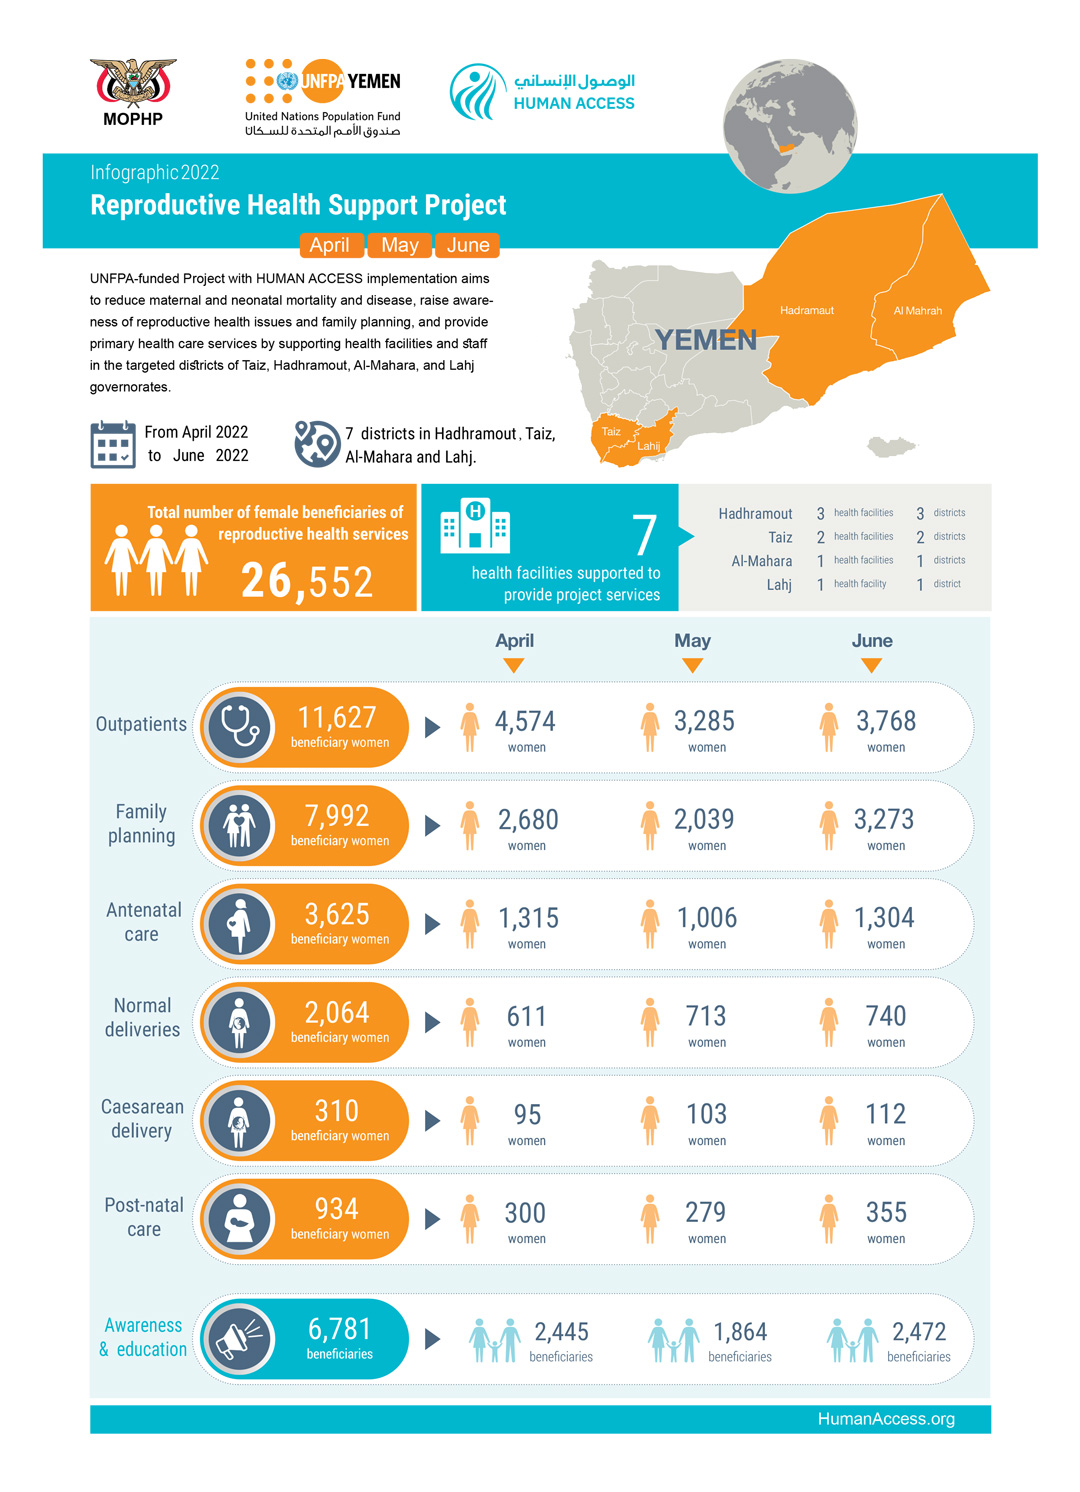 Infographic for Reproductive Health Support Project 2022 (April, May, June)